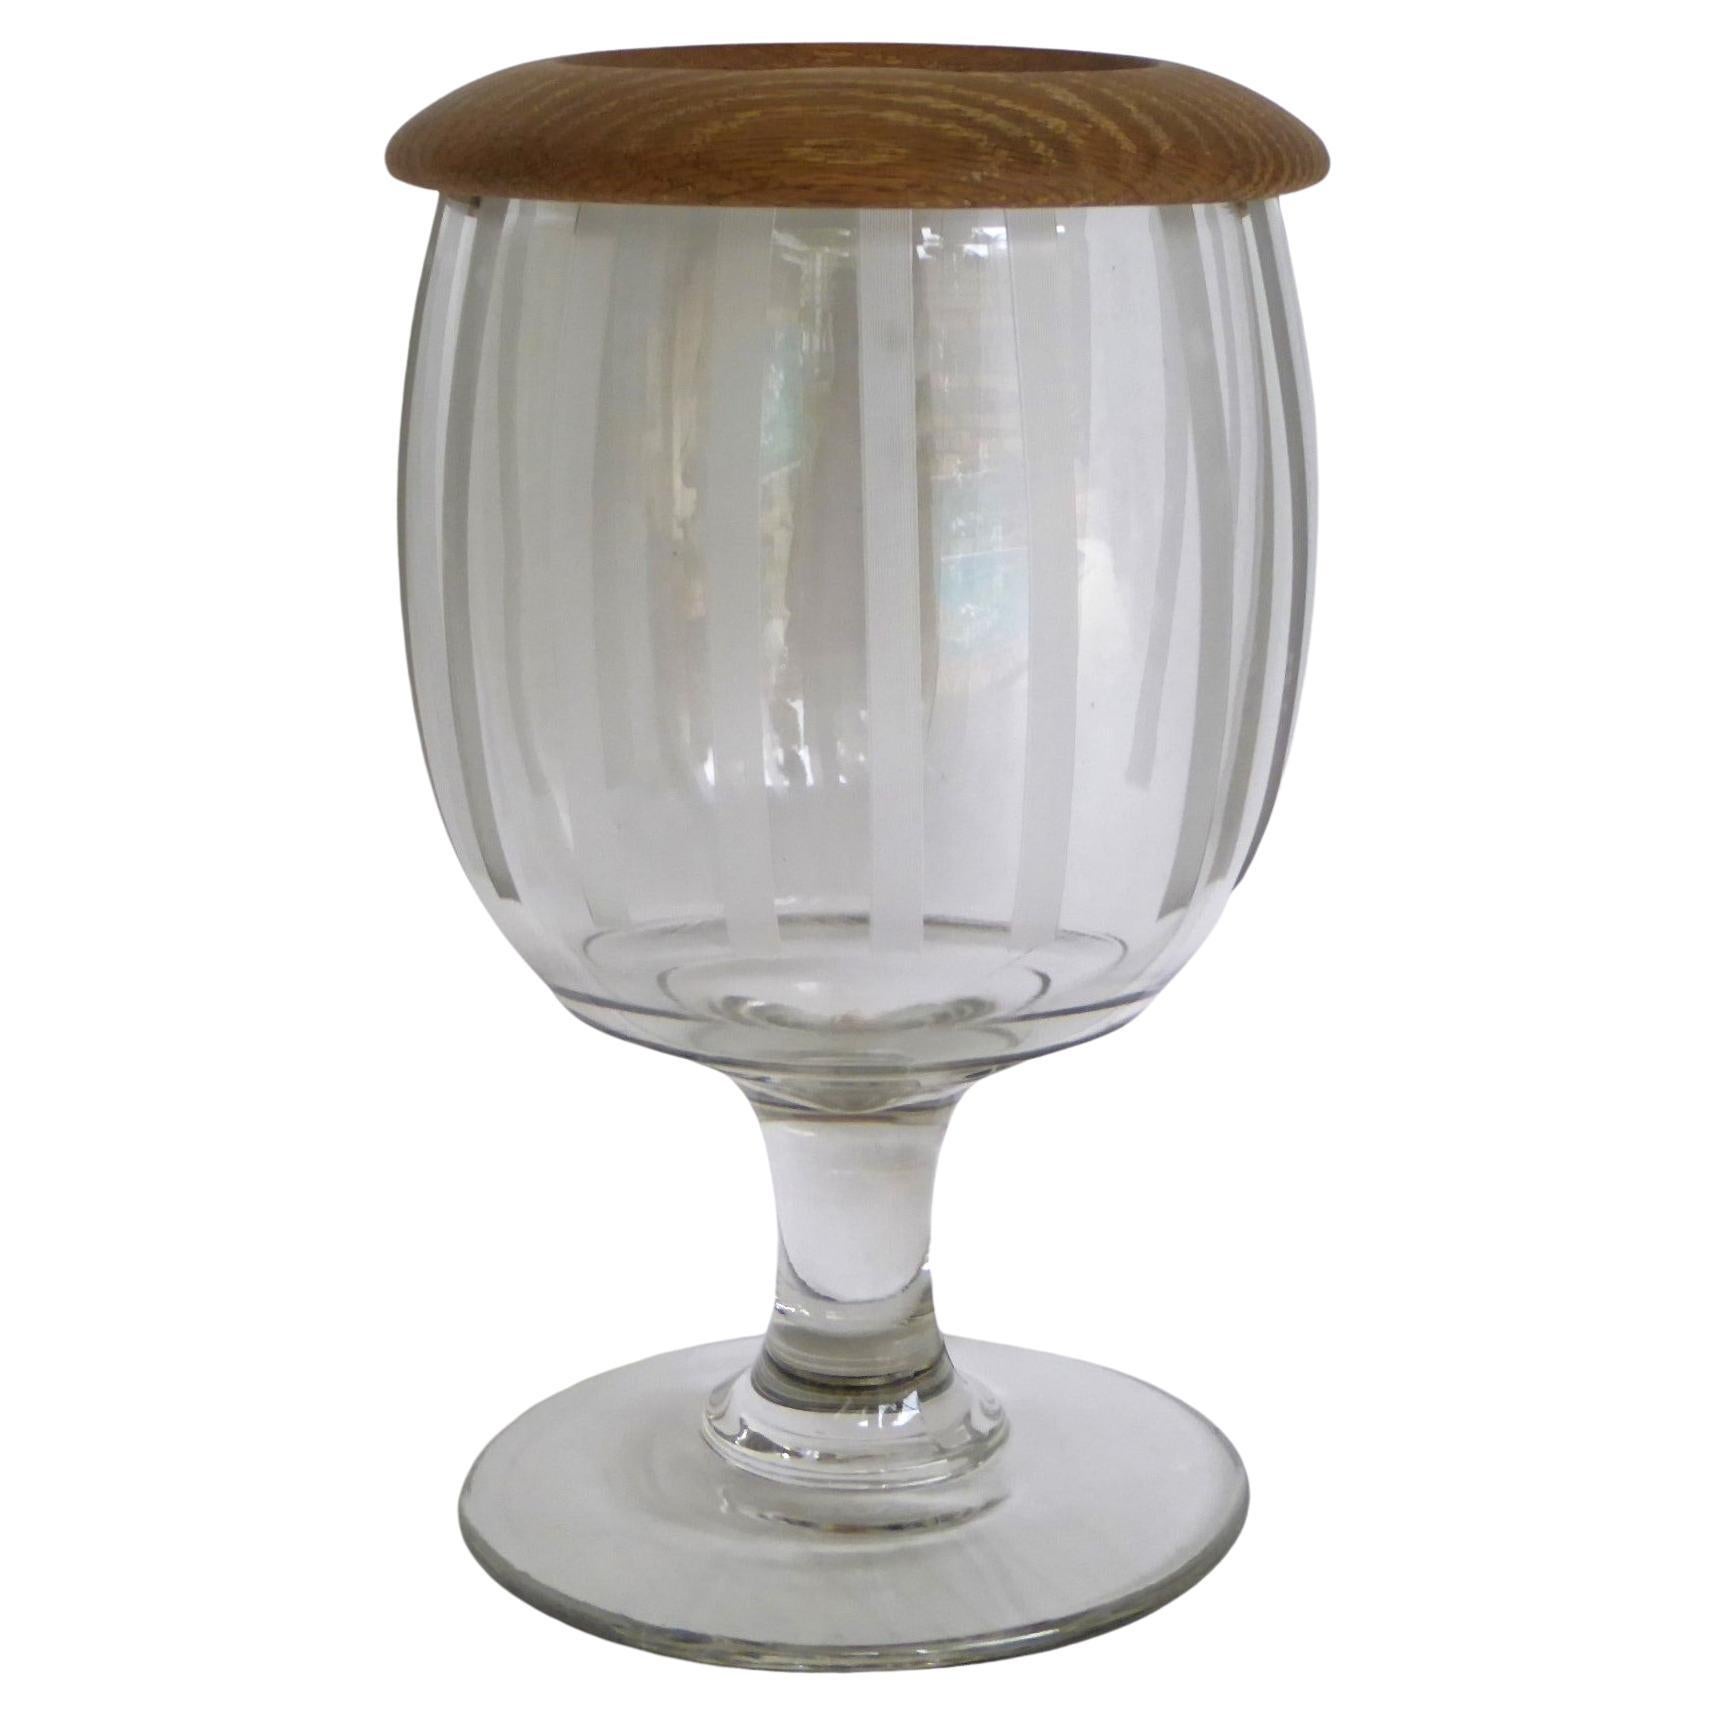 Rustic Large Etched Glass Goblet Vessel with Wood Top 1950s.